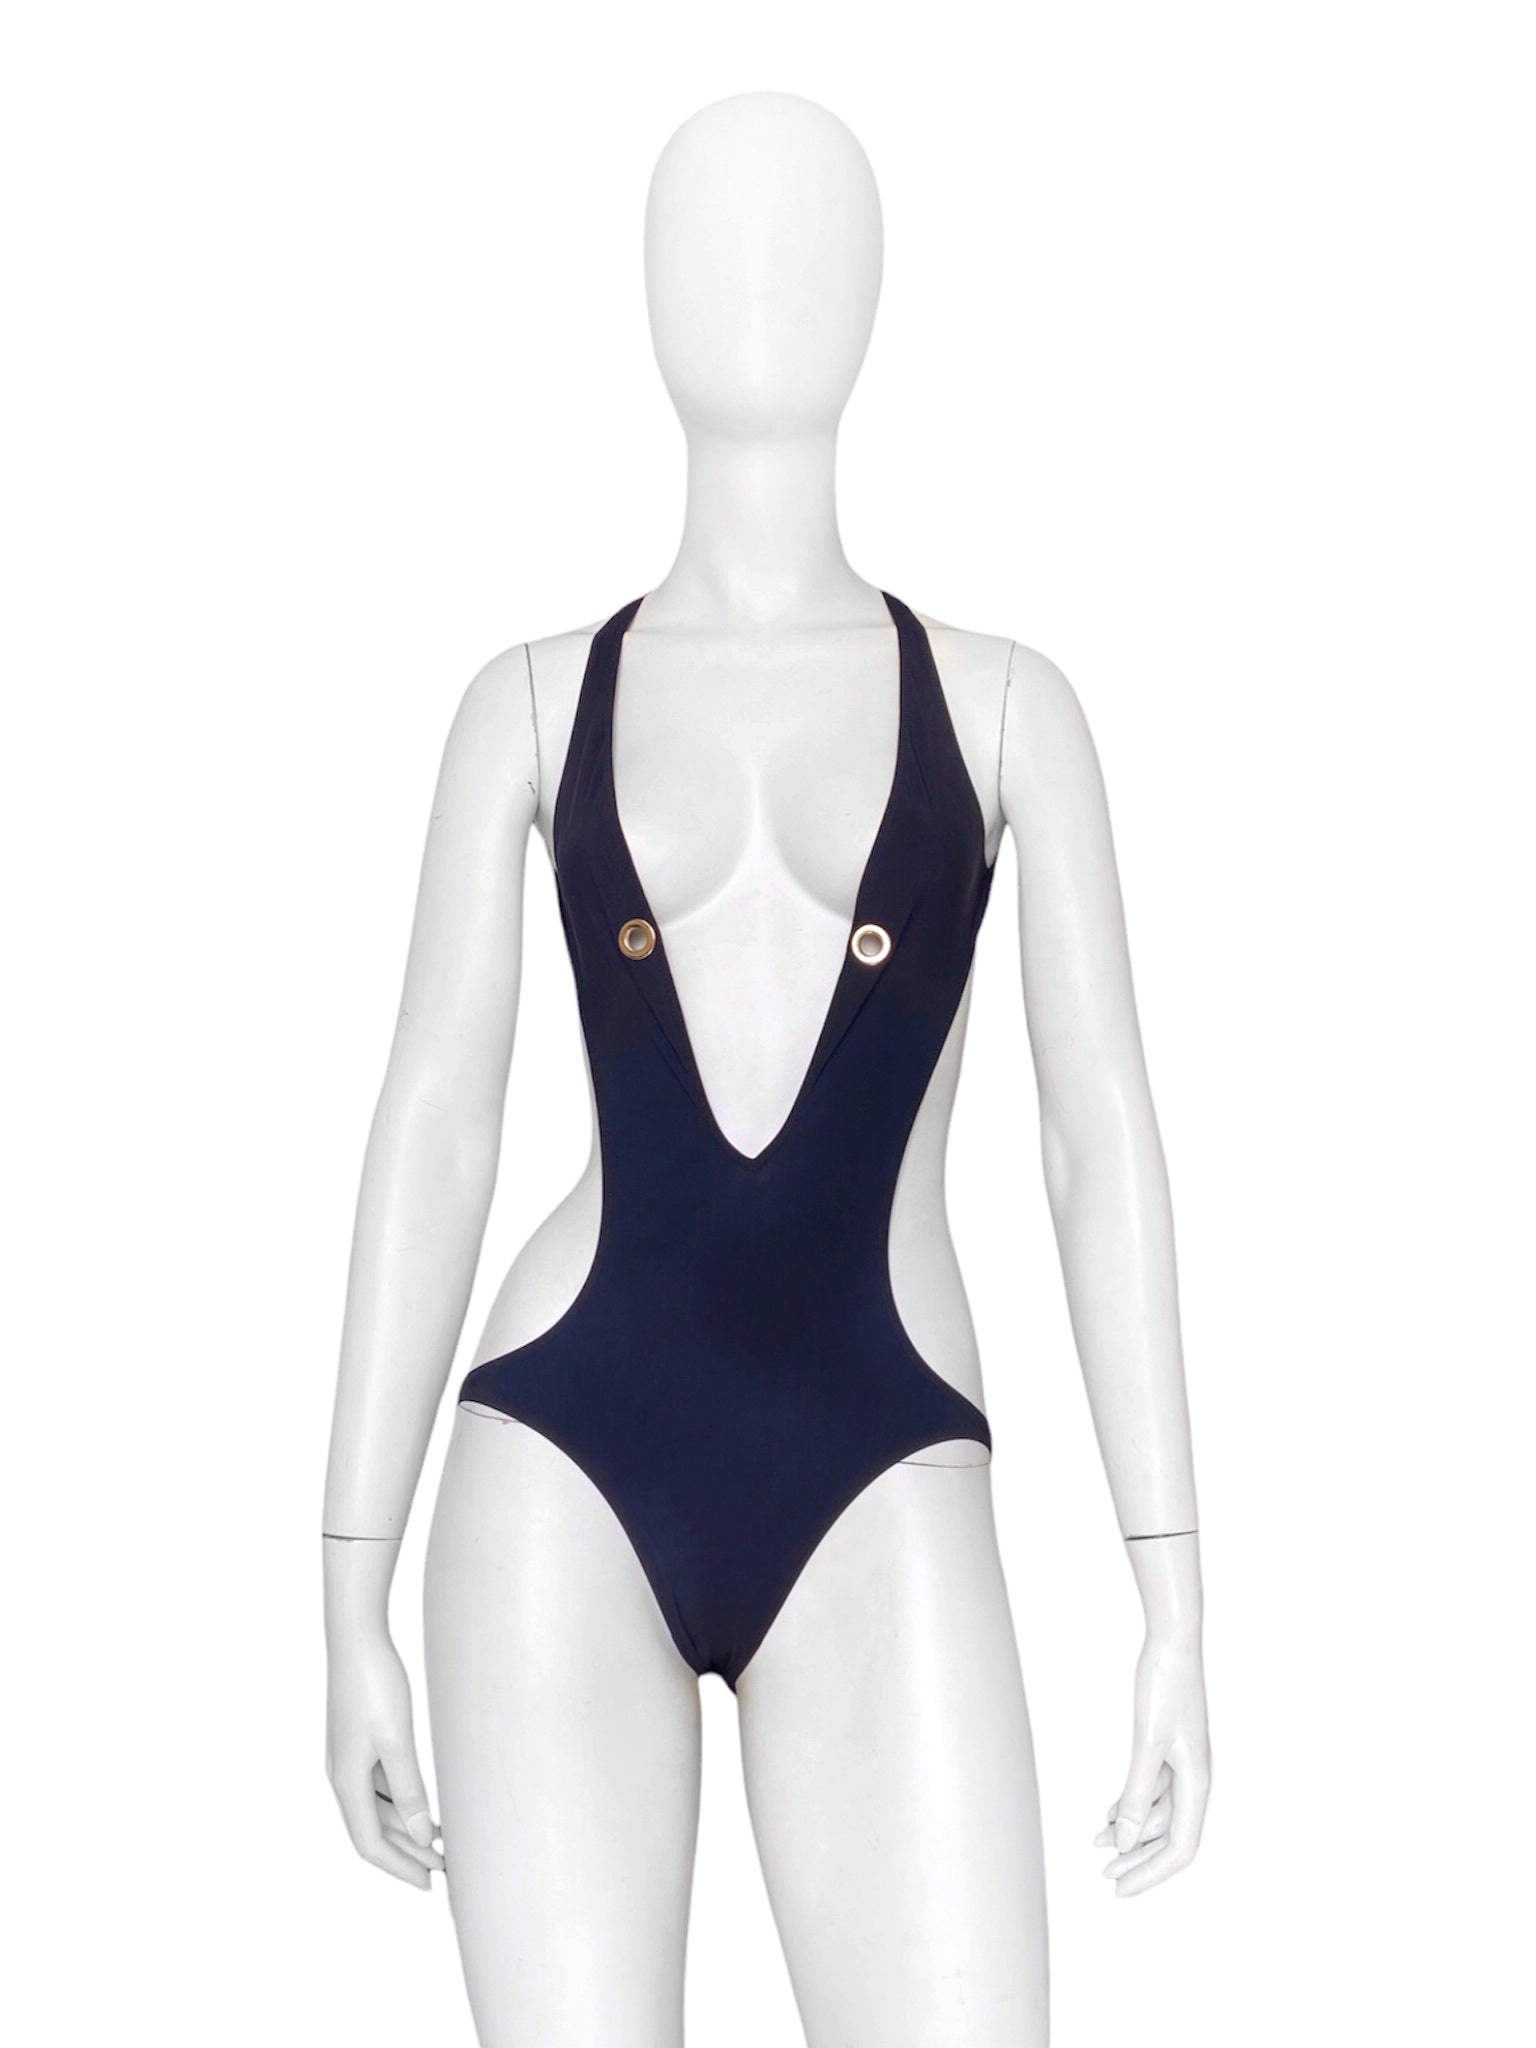 Gucci 00s Minimal Sexy Plunge Swimsuit XS - 1